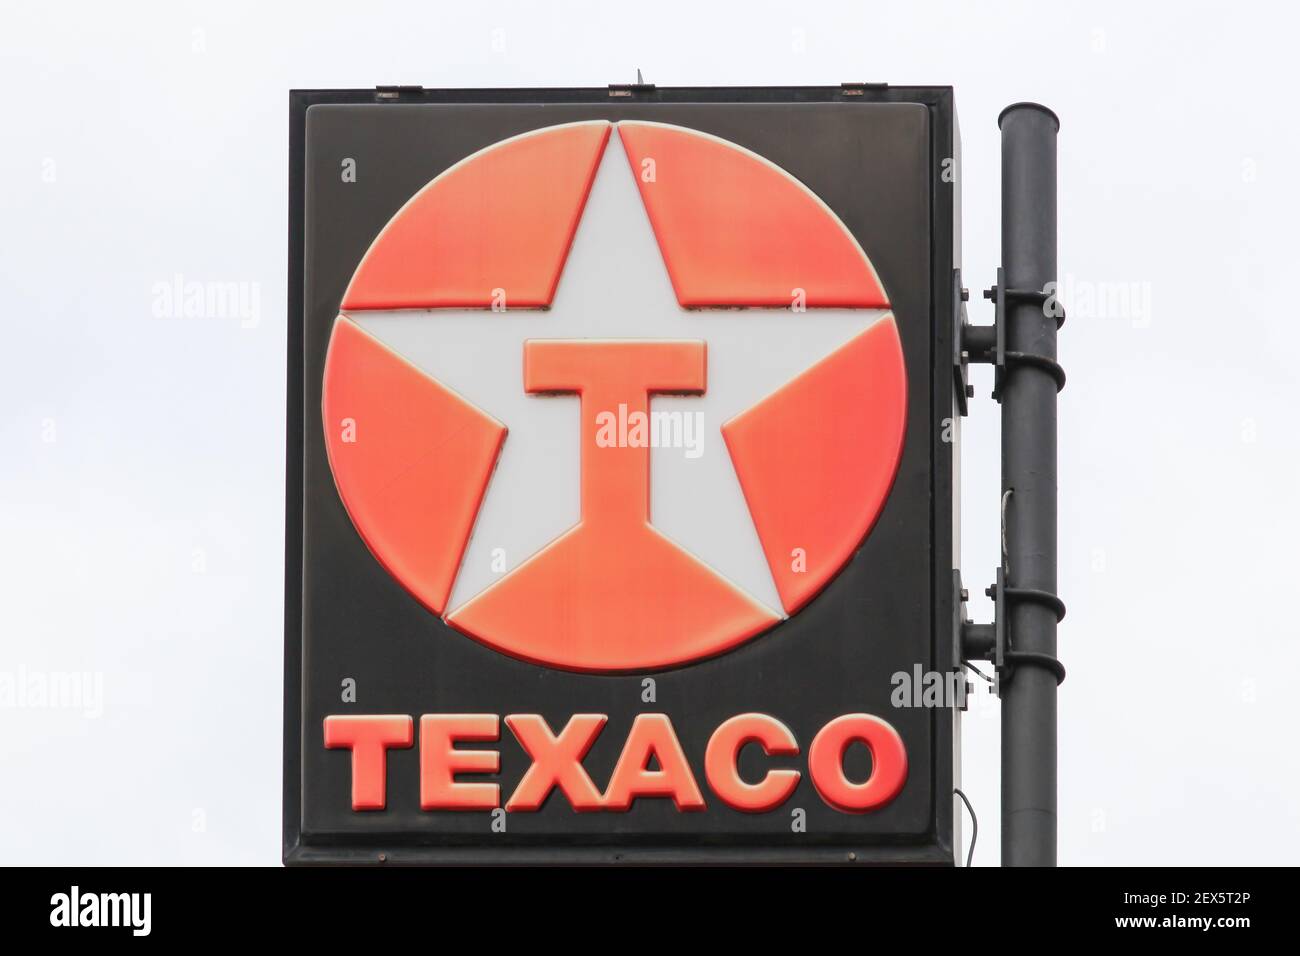 Luxembourg, Luxembourg - September2, 2018: Texaco logo on a pole. Texaco is an American oil subsidiary of Chevron Corporation Stock Photo